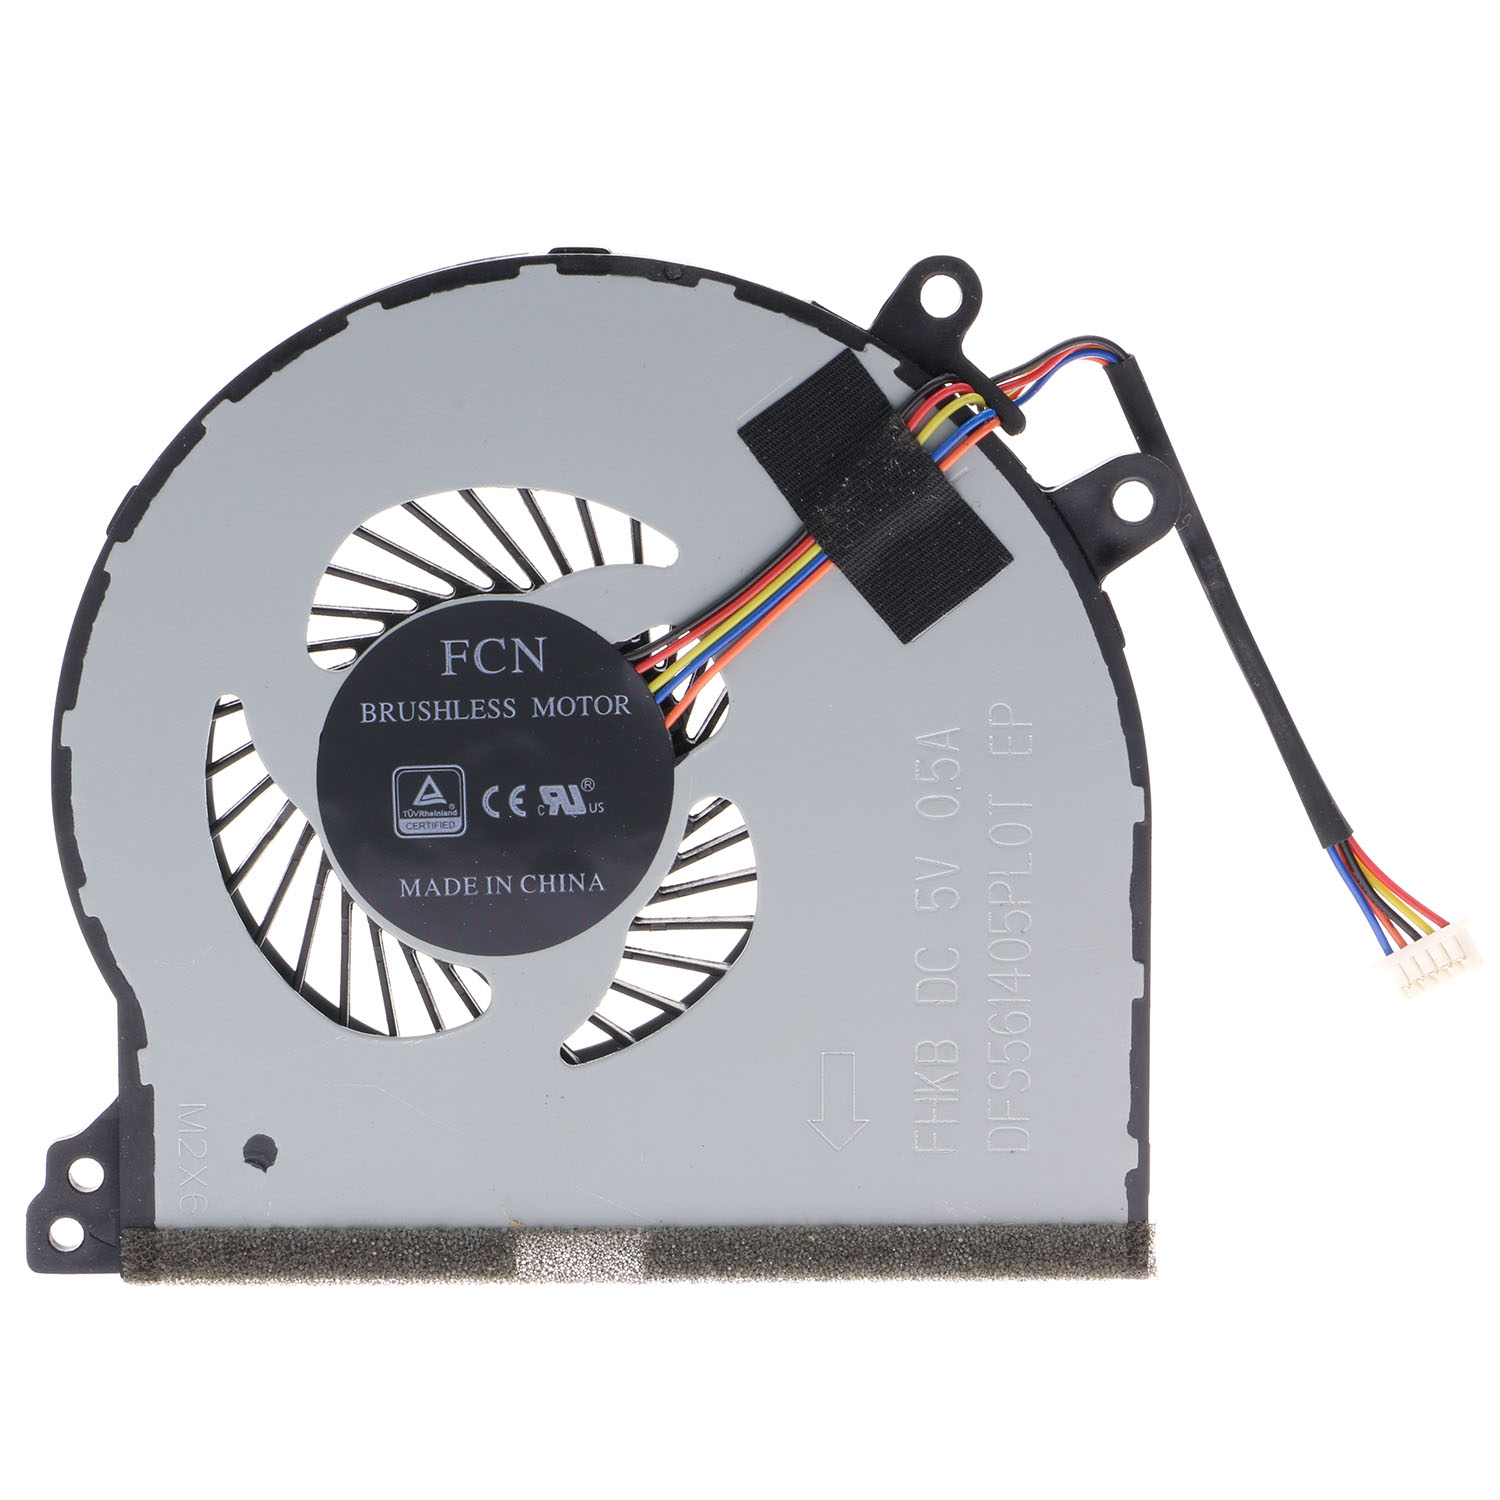 CPU Cooling Fan For Lenovo IdeaPad 510-15IKB 510-15ISK 310-15ABR 310 ...